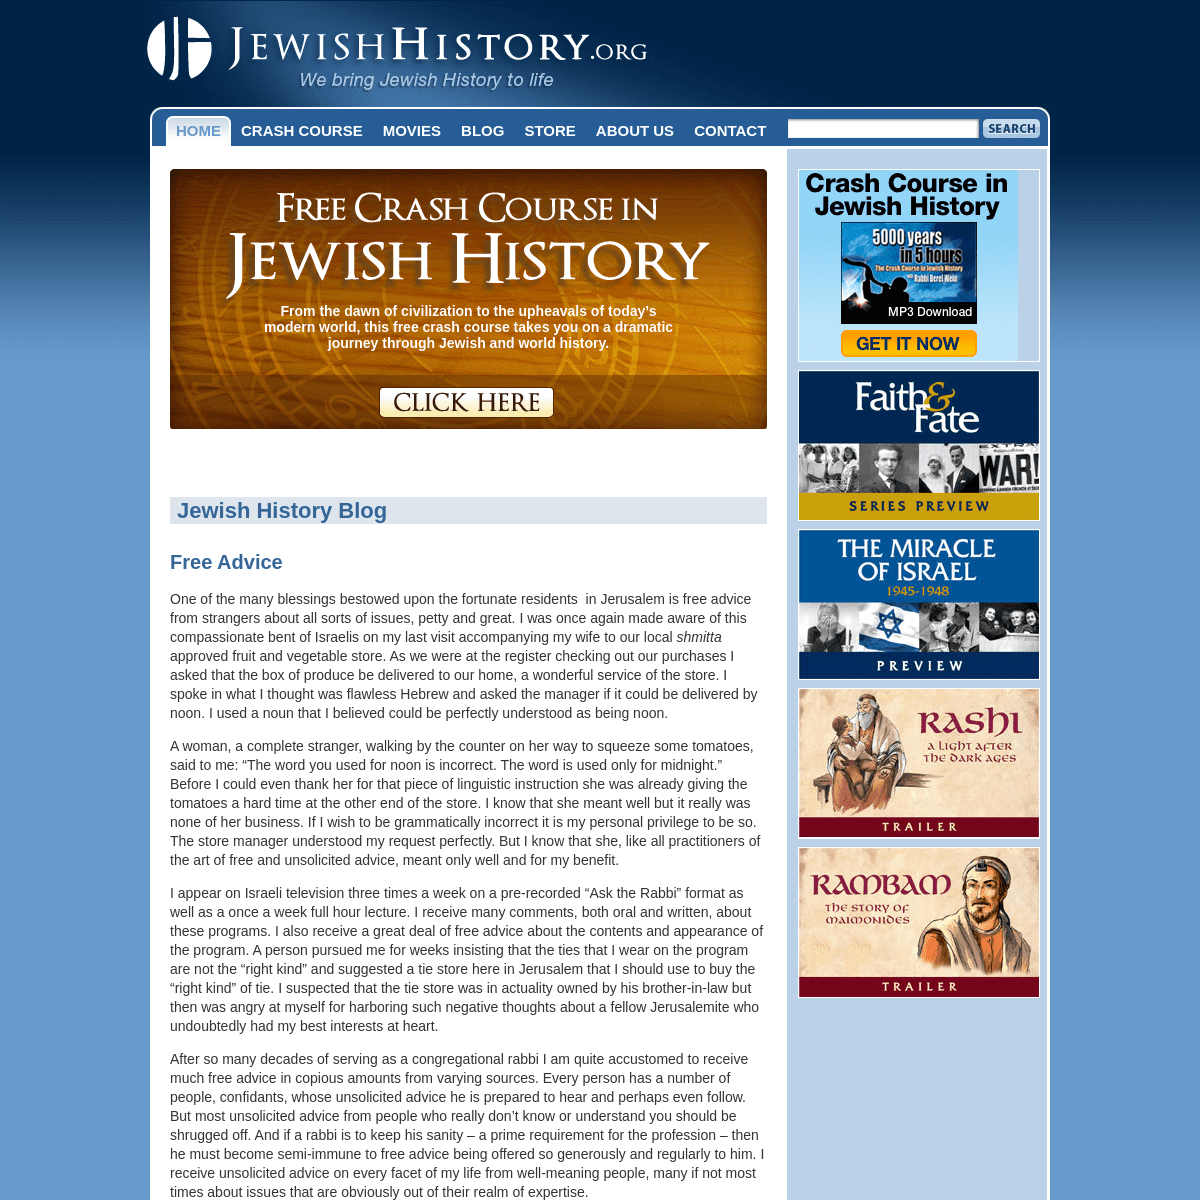 A complete backup of https://jewishhistory.org